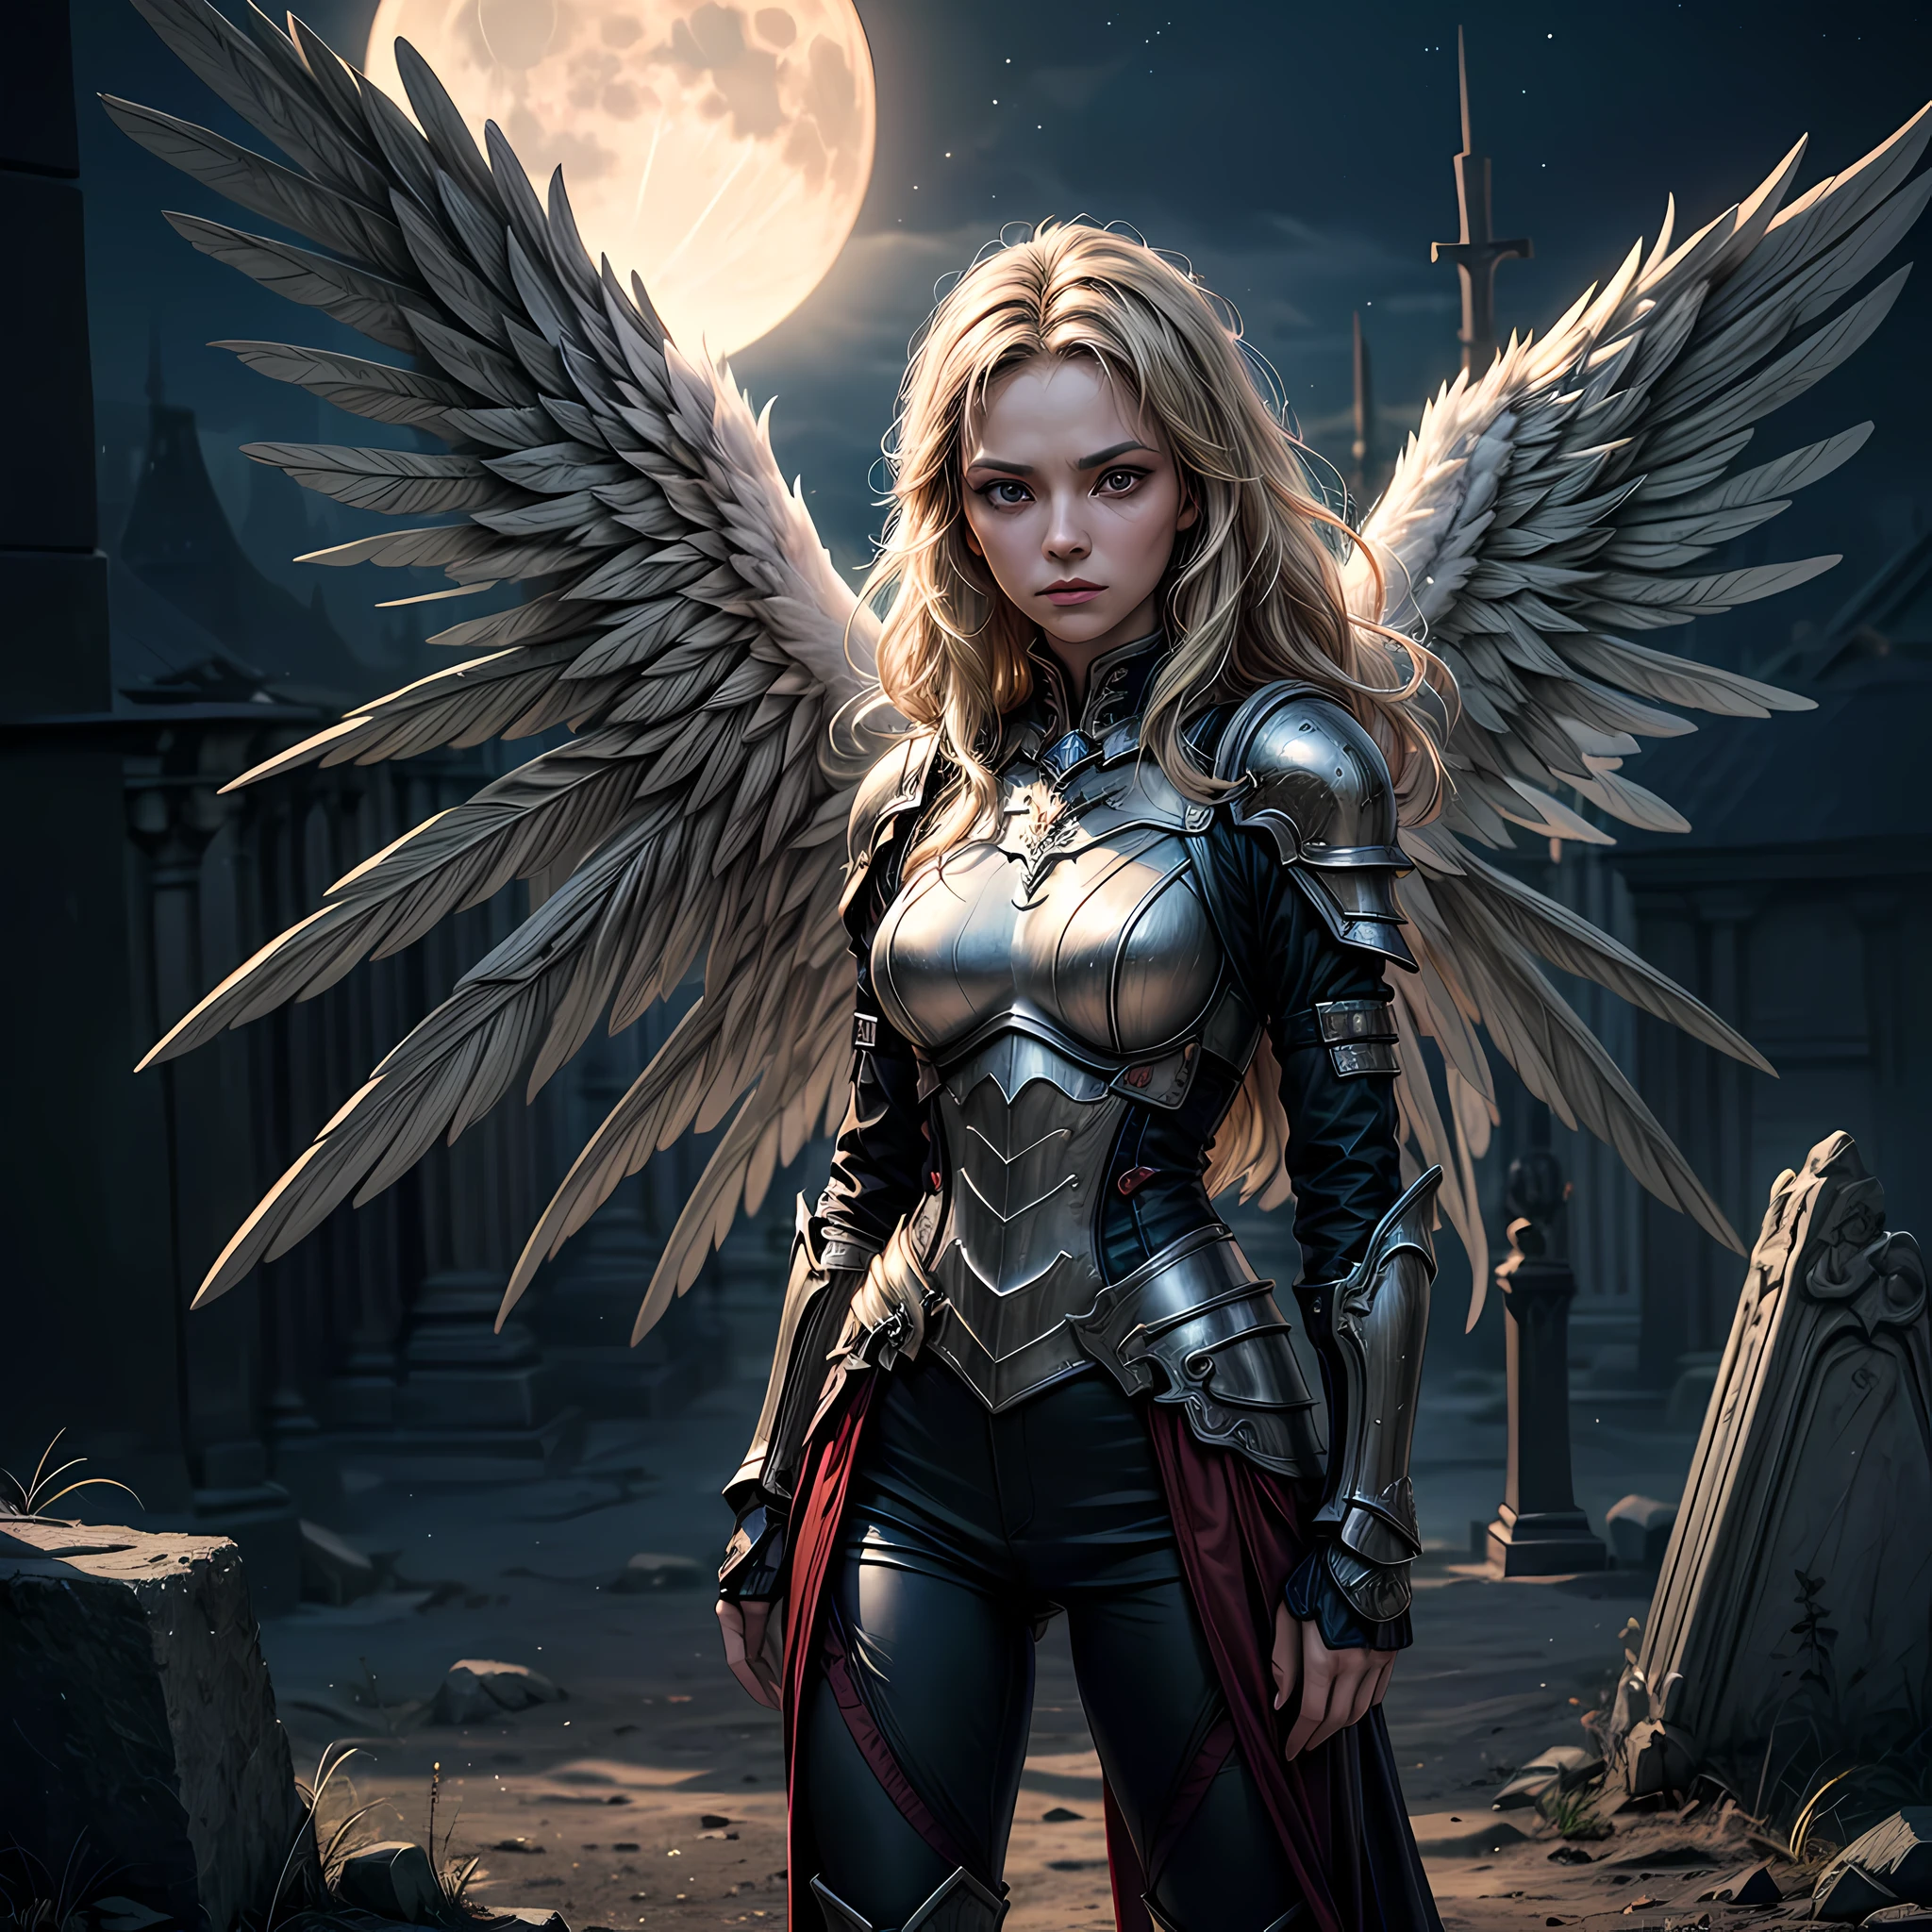 16K, ultra detailed, masterpiece, best quality, (extremely detailed), arafed, dnd art, portrait, full body, aasimar, female, (Masterpiece 1.3, intense details), female, paladin, holy warrior fighting undead (Masterpiece 1.3, intense details) large angelic wings, white angelic wings spread (Masterpiece 1.3, intense details), dark fantasy cemetery background, moon light, moon, stars, clouds, wearing white armor (Masterpiece 1.3, intense details), holy symbol, armed with sword, short blond hair, masculine, detailed face, (Masterpiece 1.5, best quality), anatomically correct (Masterpiece 1.3, intense details), angel_wings, determined face, god rays, cinematic lighting, glowing light, silhouette, from outside, photorealism, panoramic view  (Masterpiece 1.3, intense details) , Wide-Angle, Ultra-Wide Angle, 8k, highres, best quality, high details